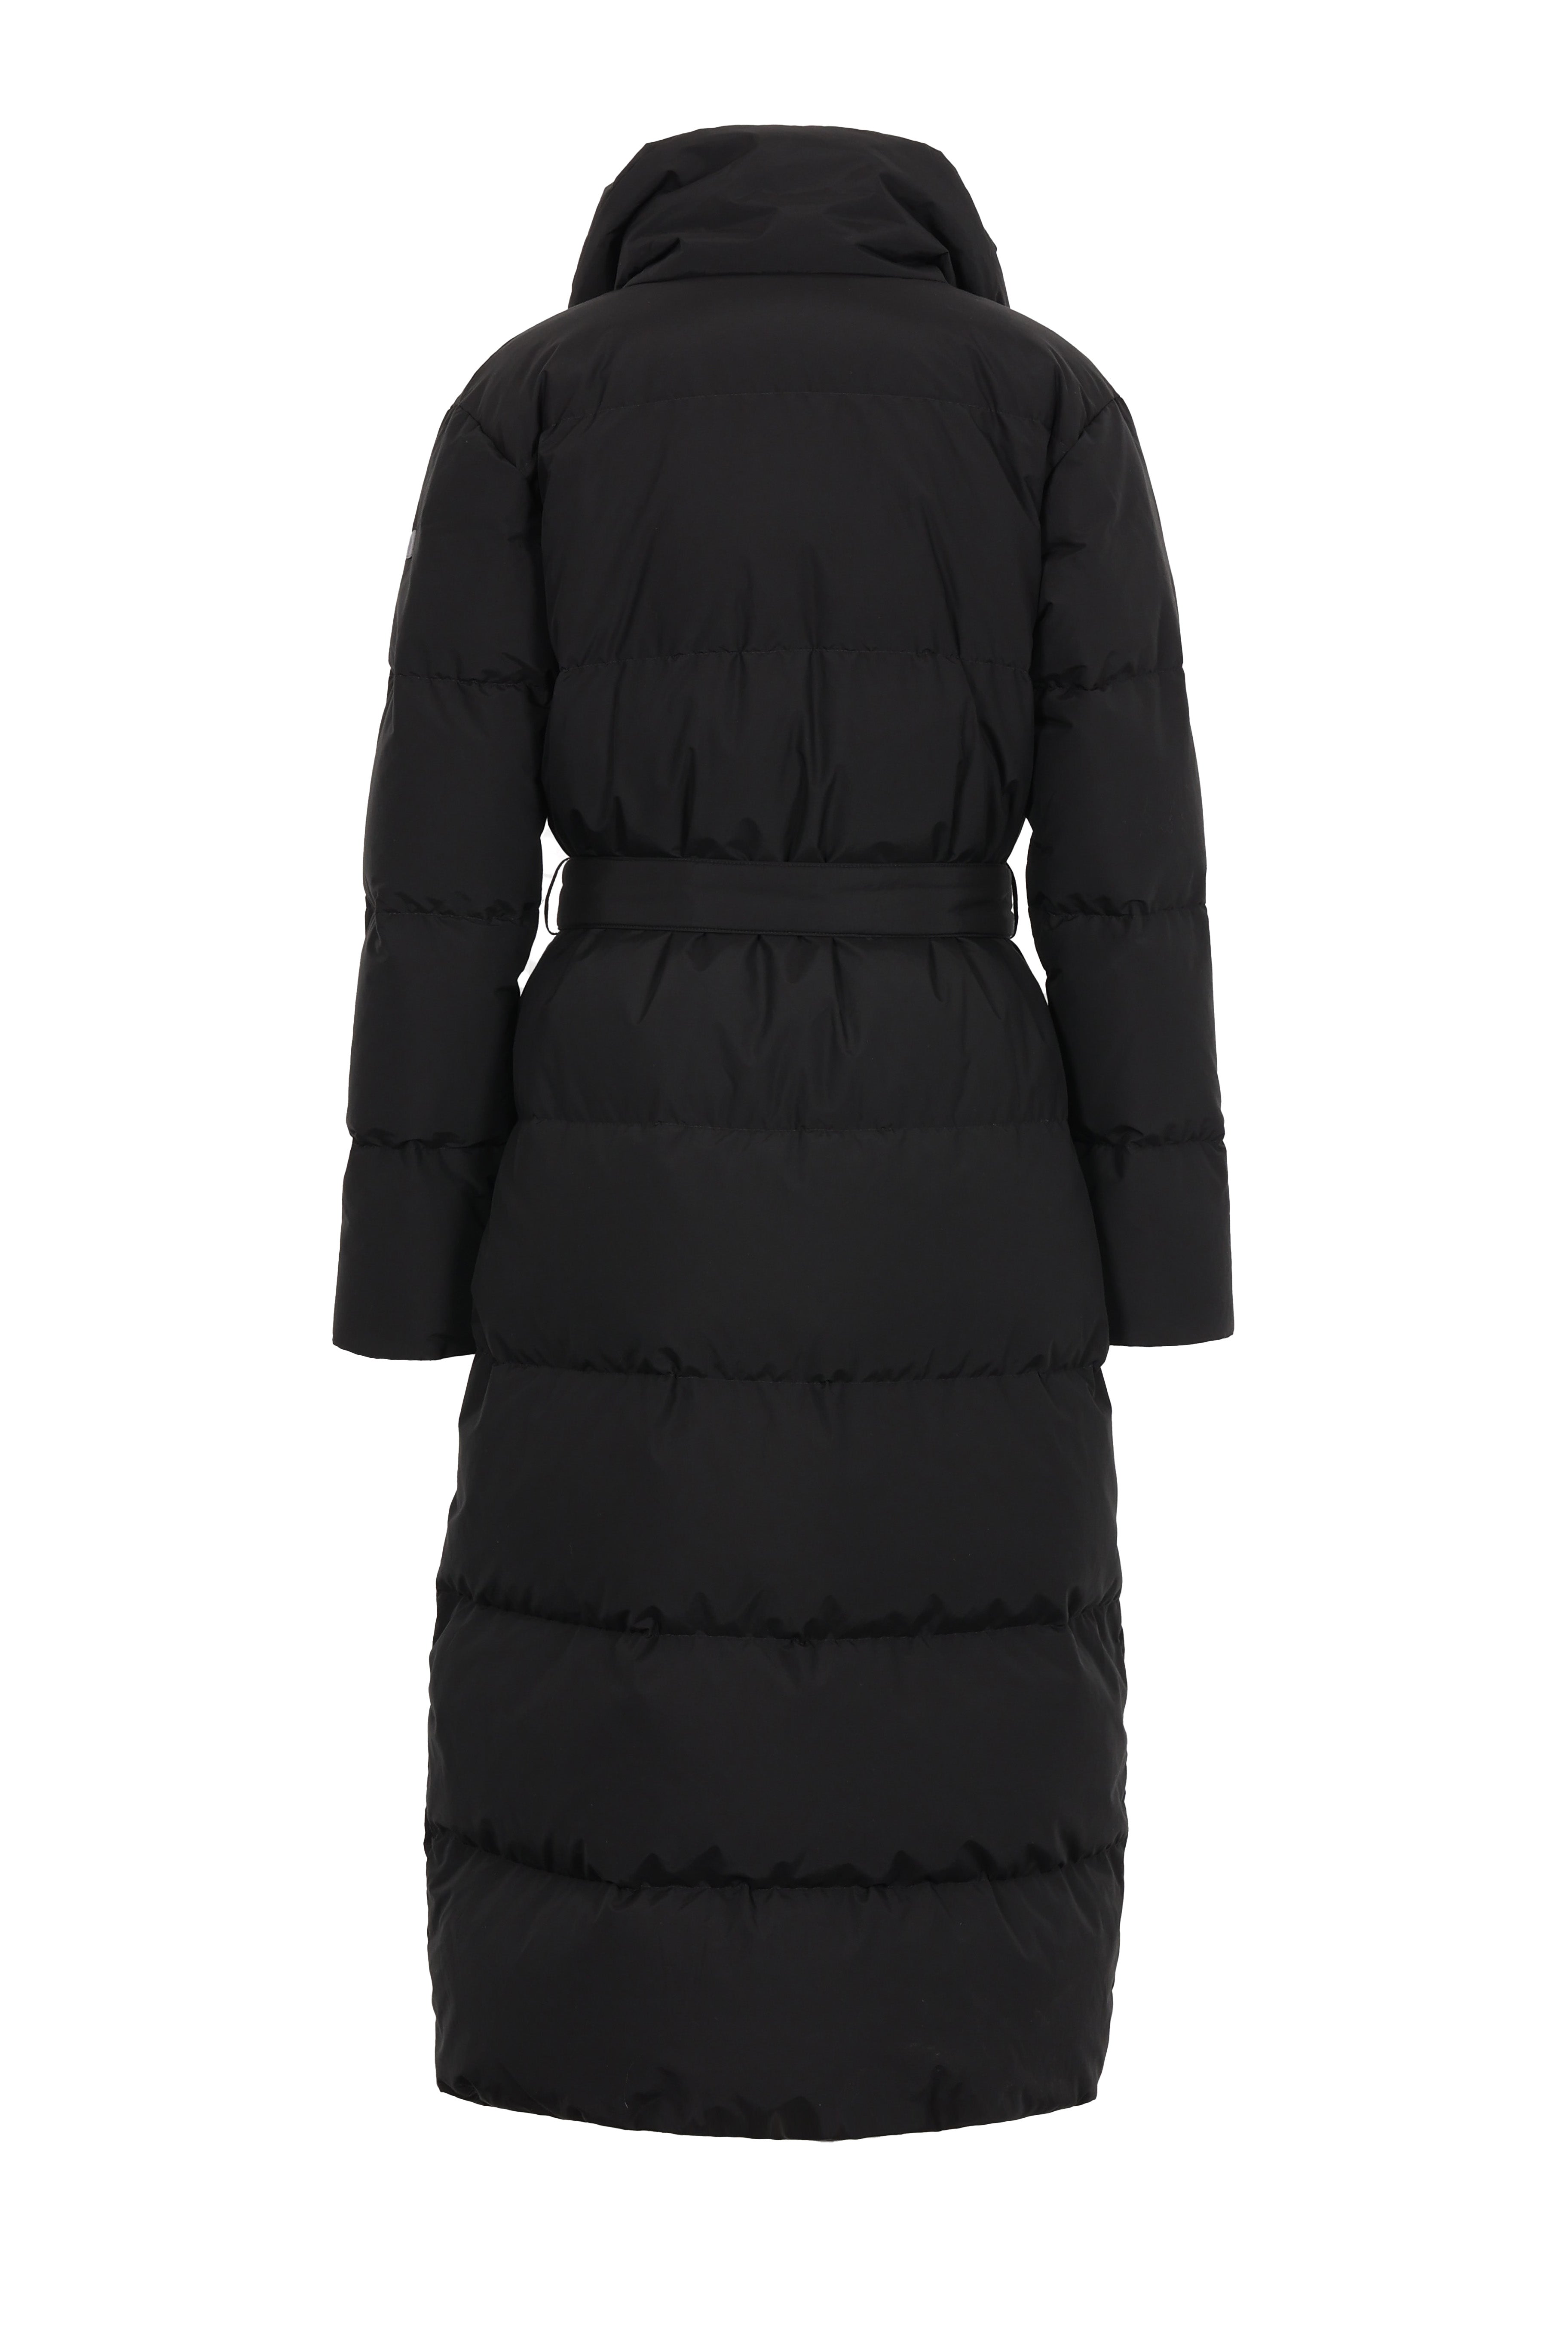 Long belted Lempelius Downcoat in the color black